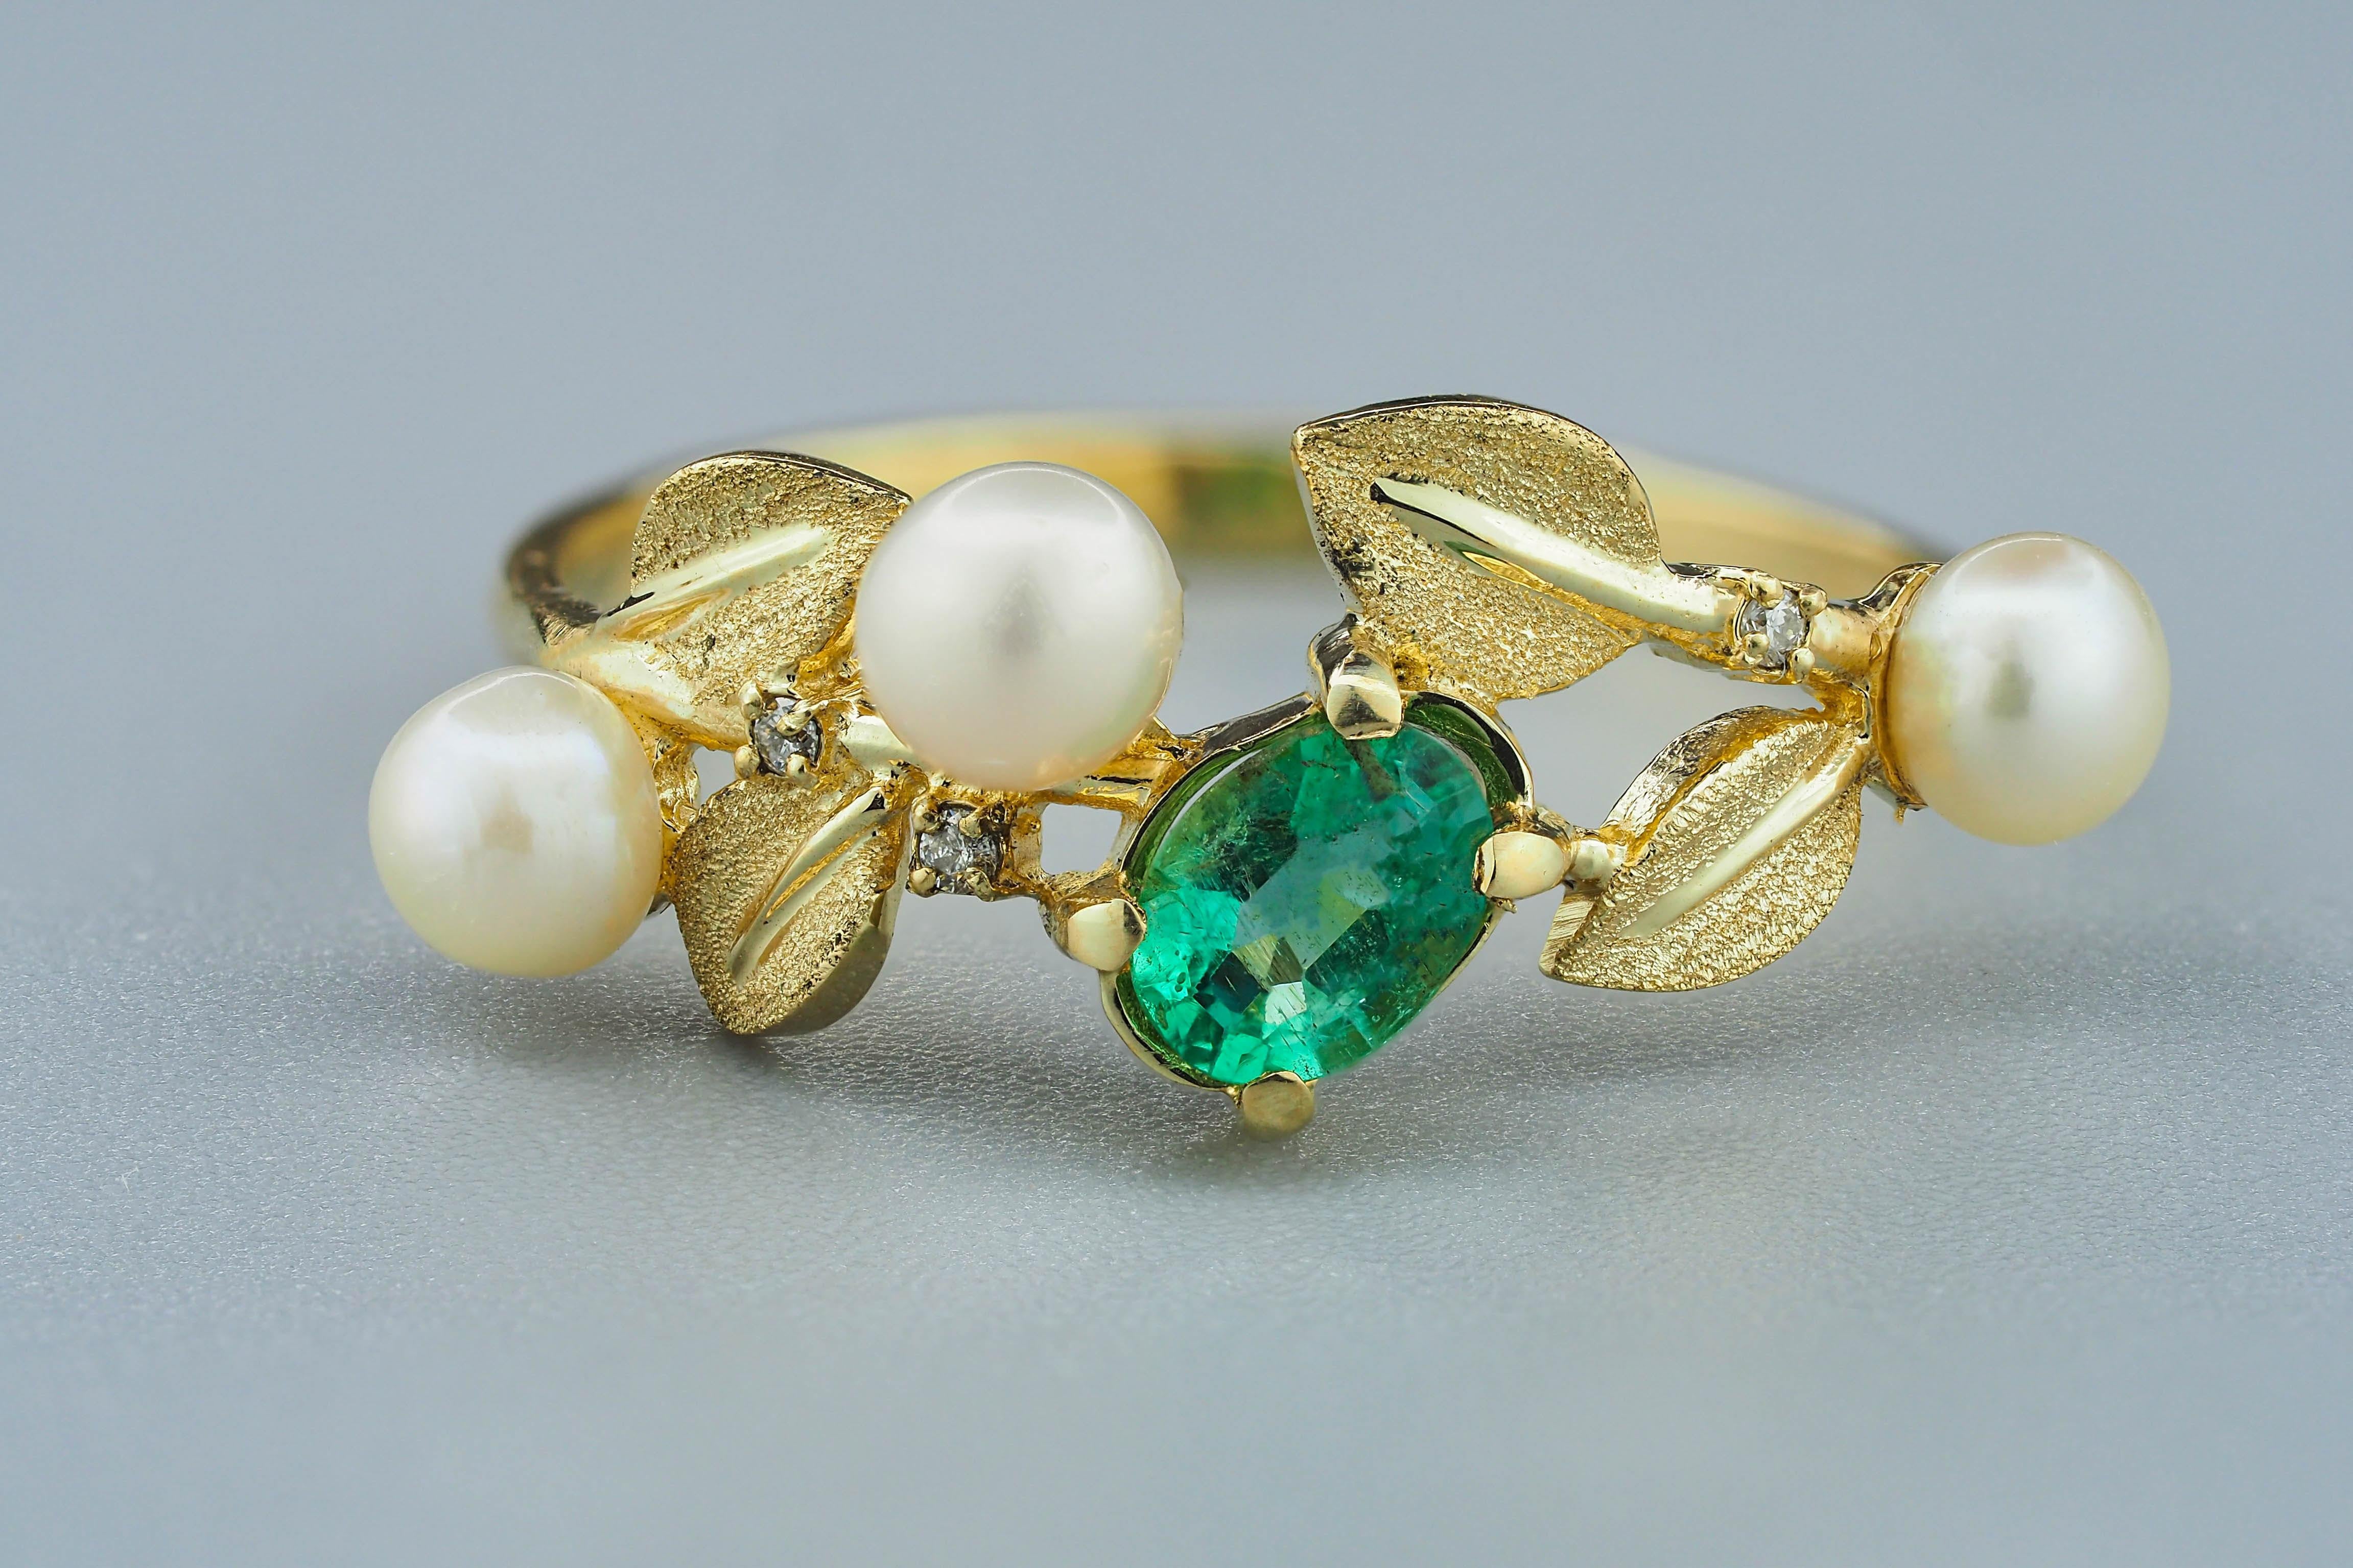 14k Gold Ring with Emerald, Pearls and Diamonds 3